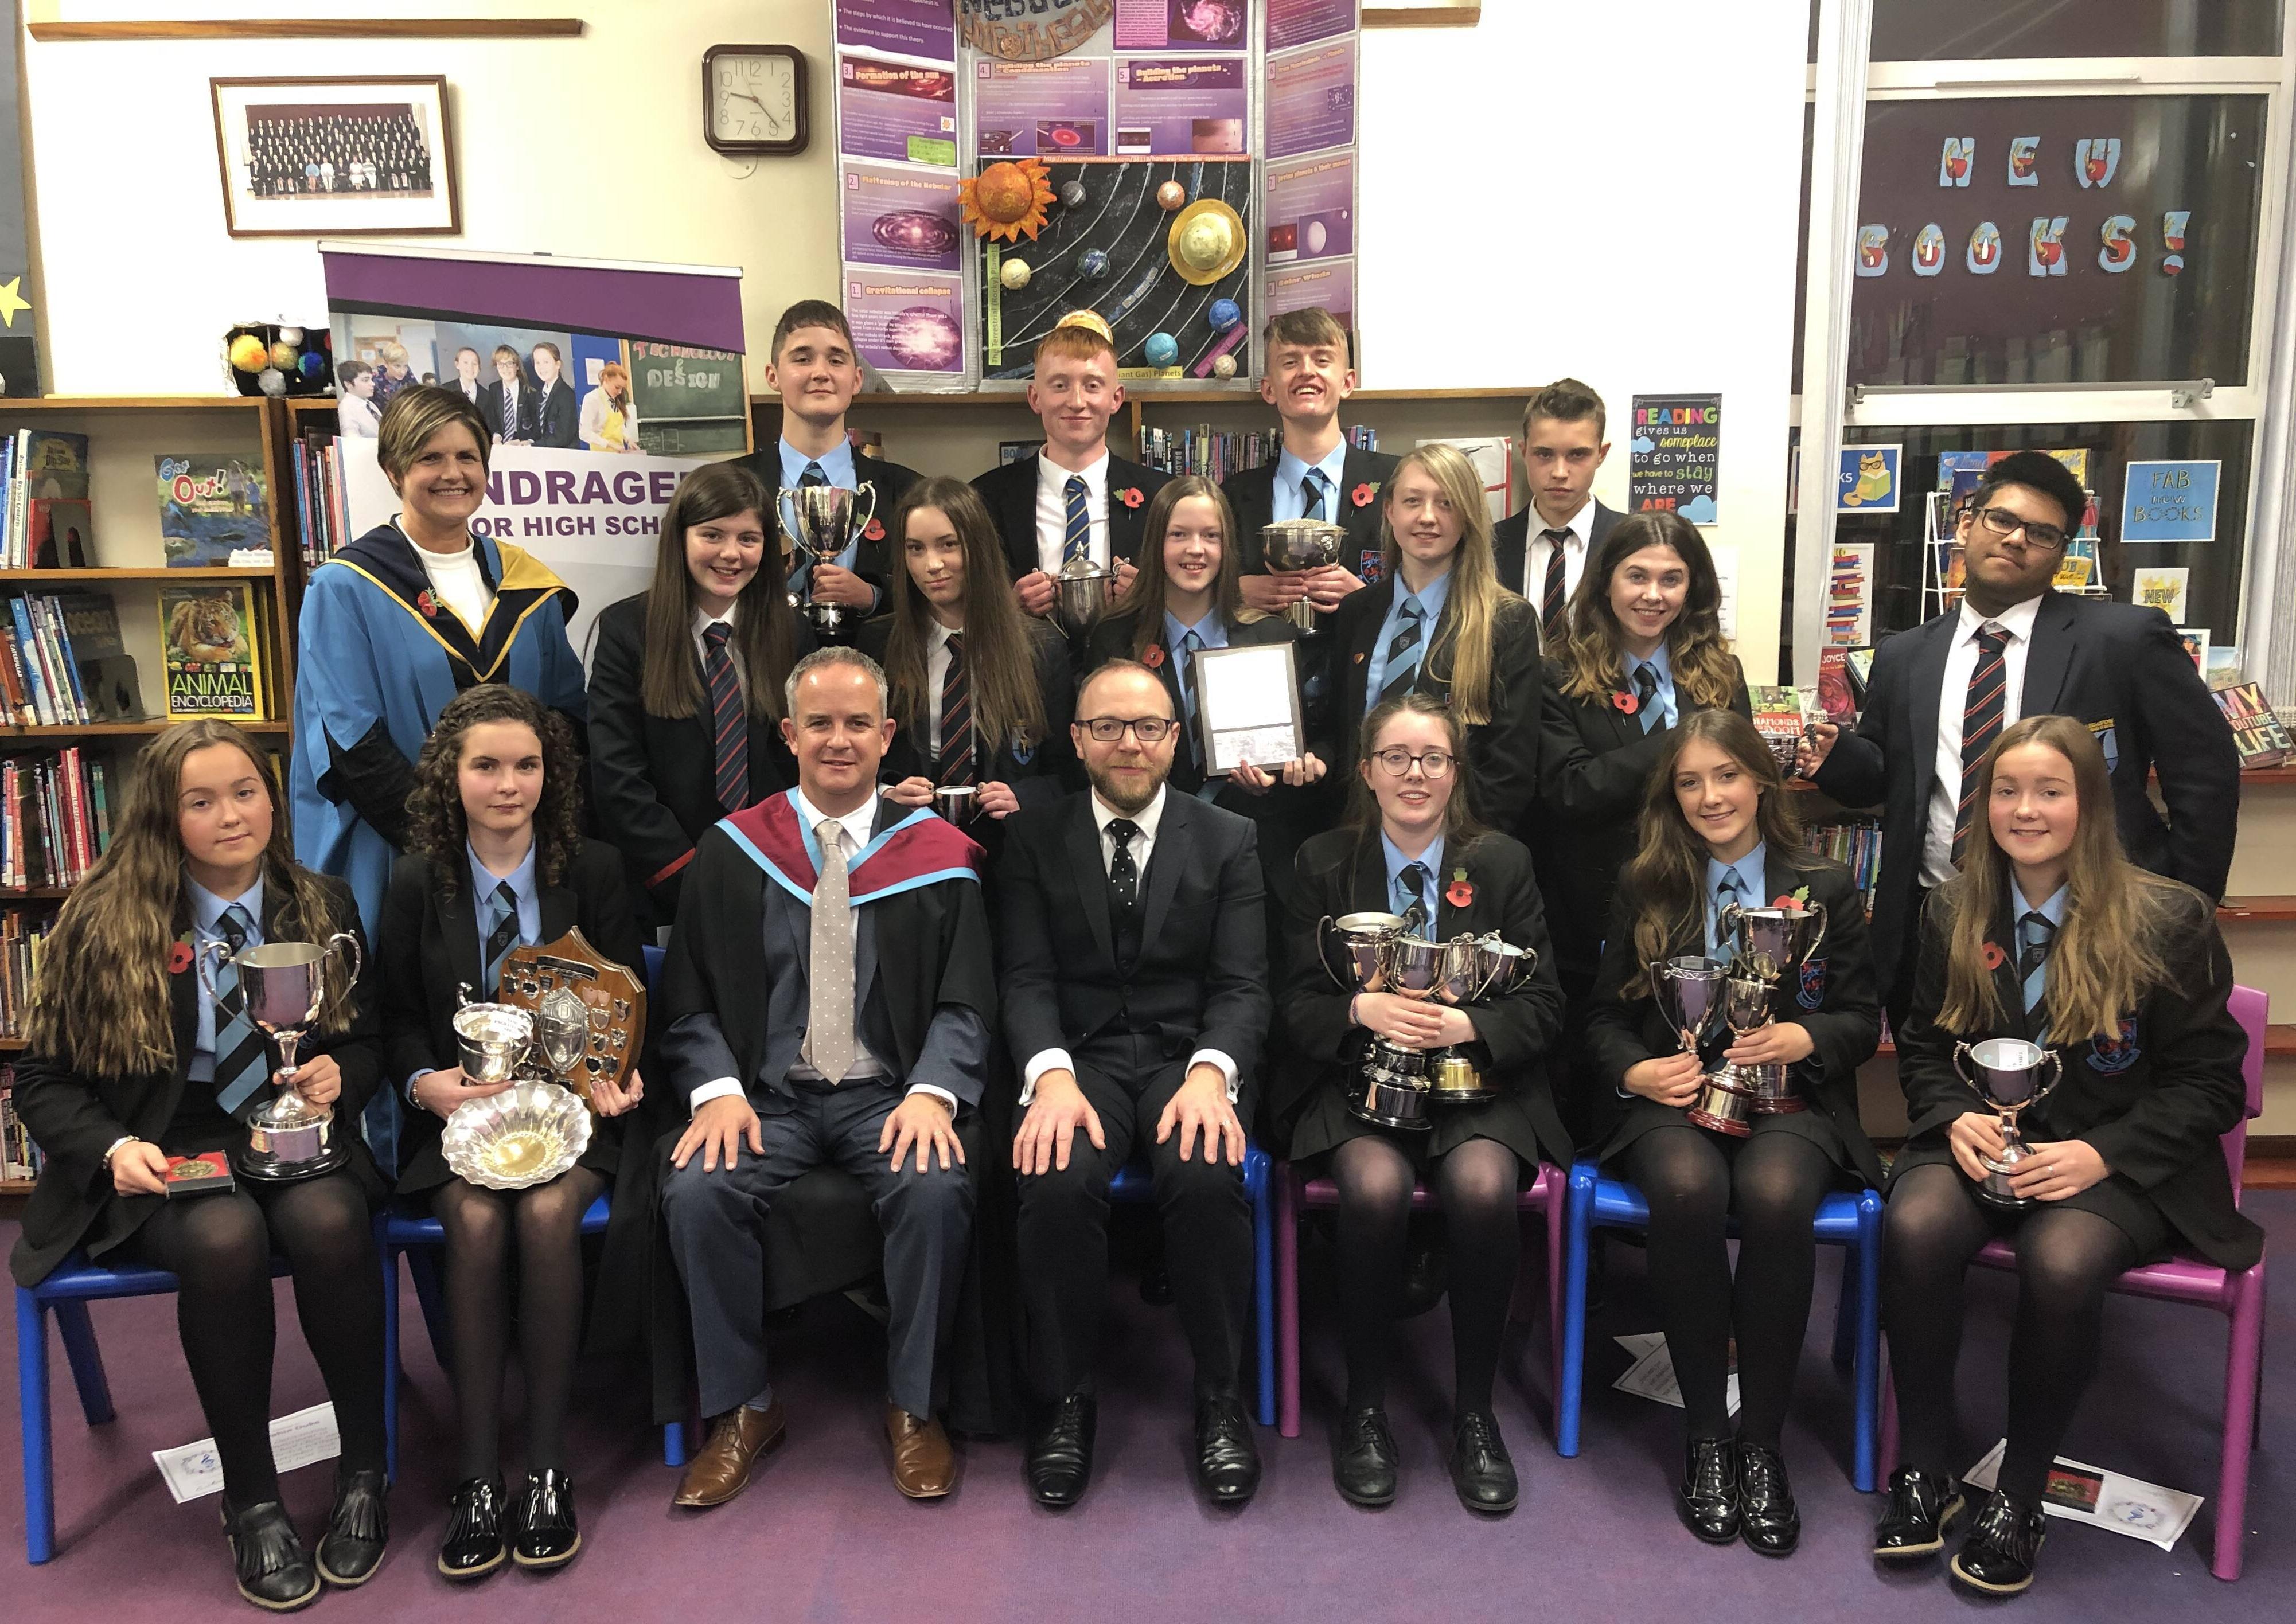 Special Award winners at the Tandragee Junior High School prize night